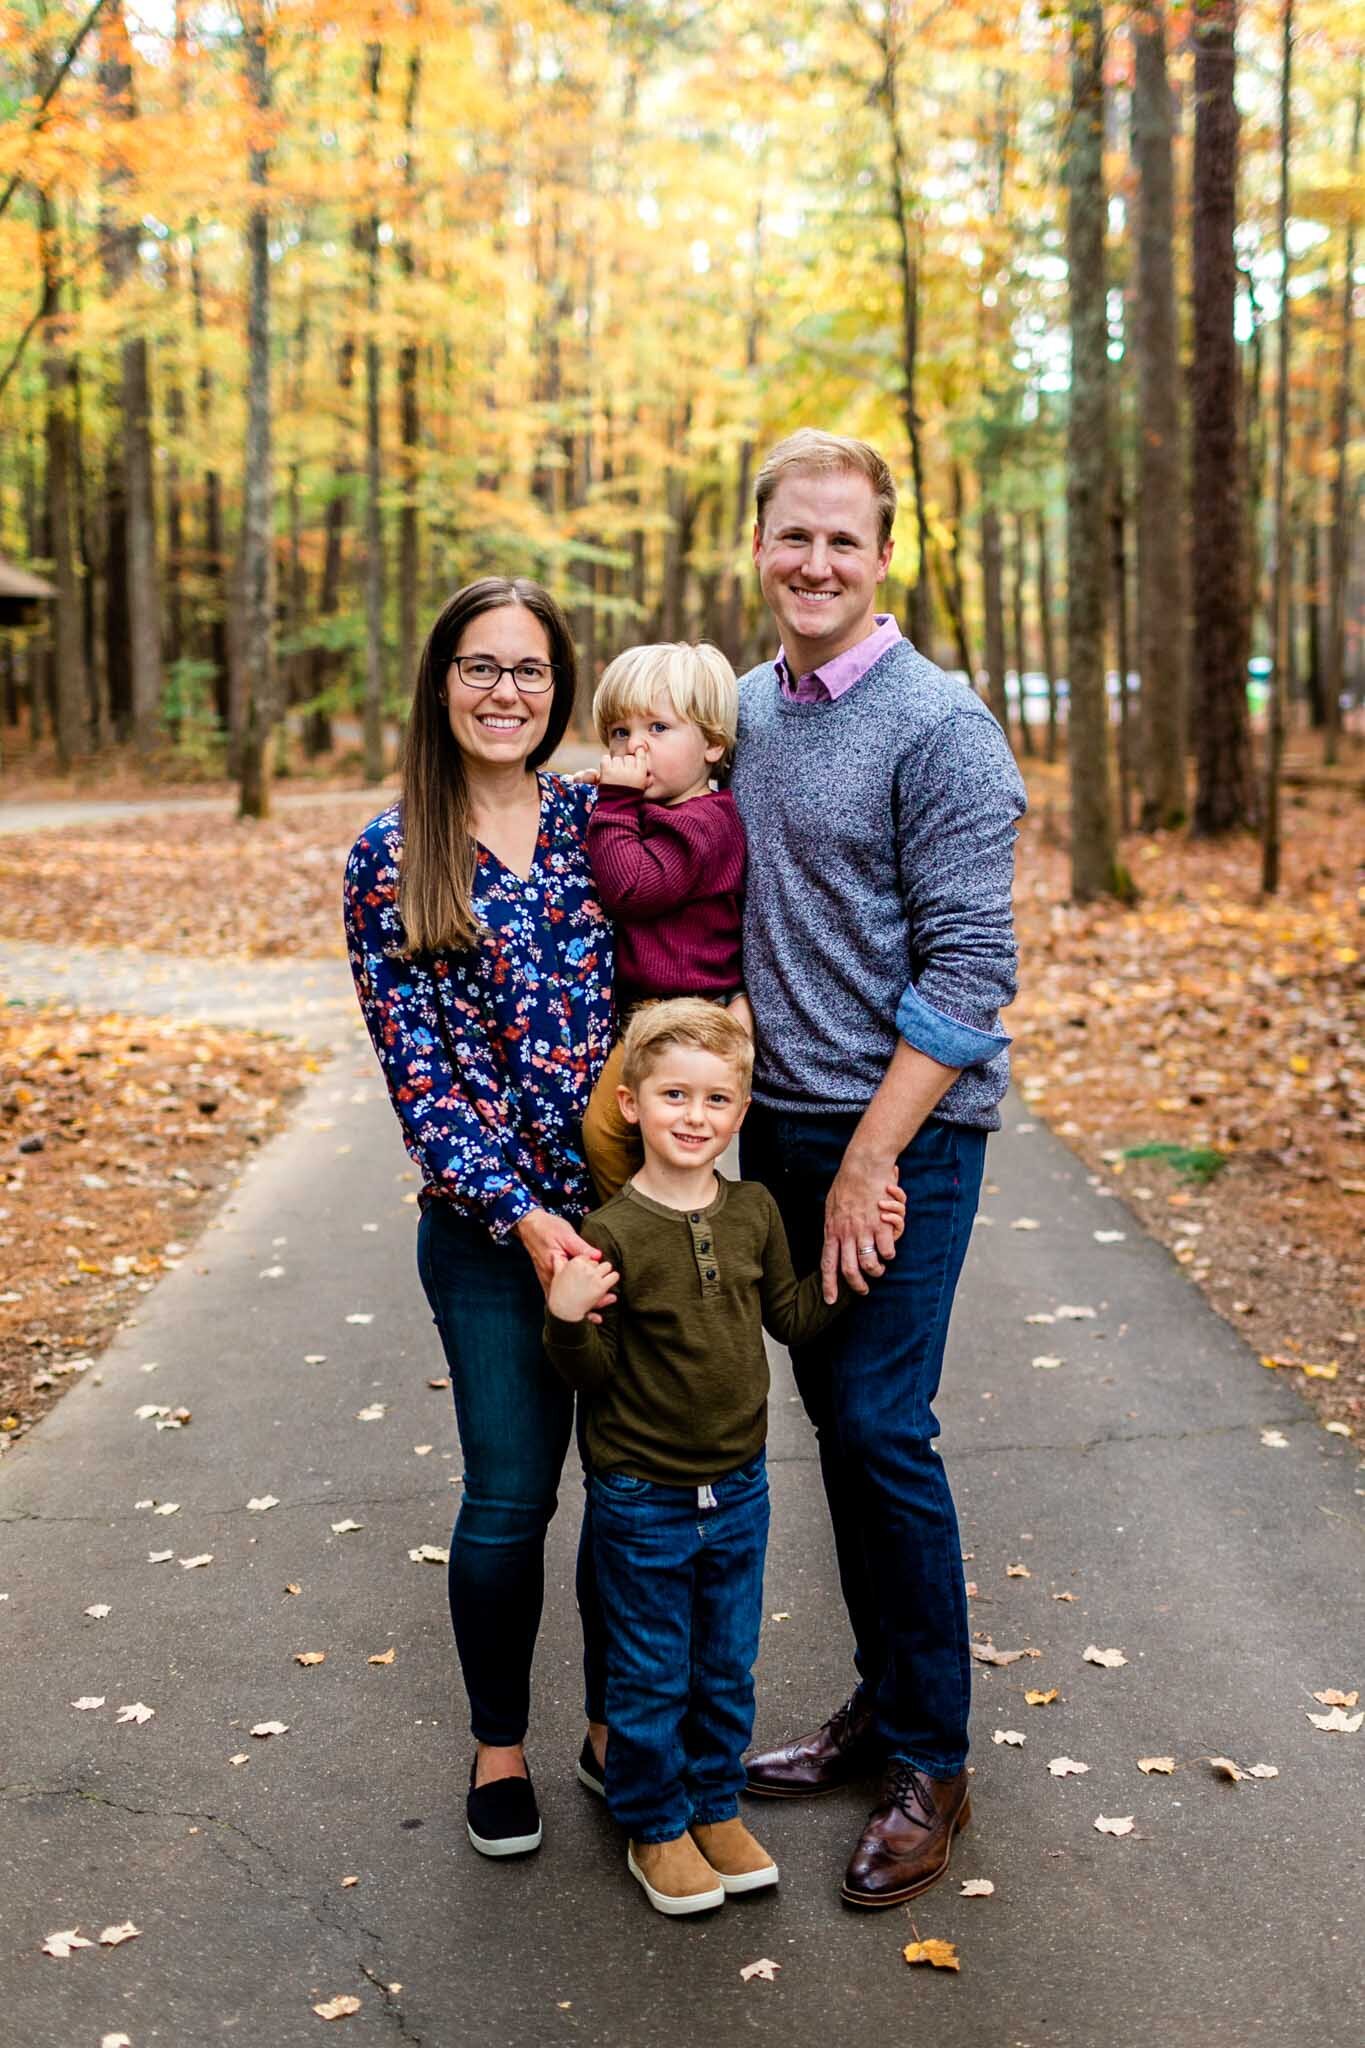 Raleigh Family Photographer at Umstead Park | By G. Lin Photography | Fall family photo in nature